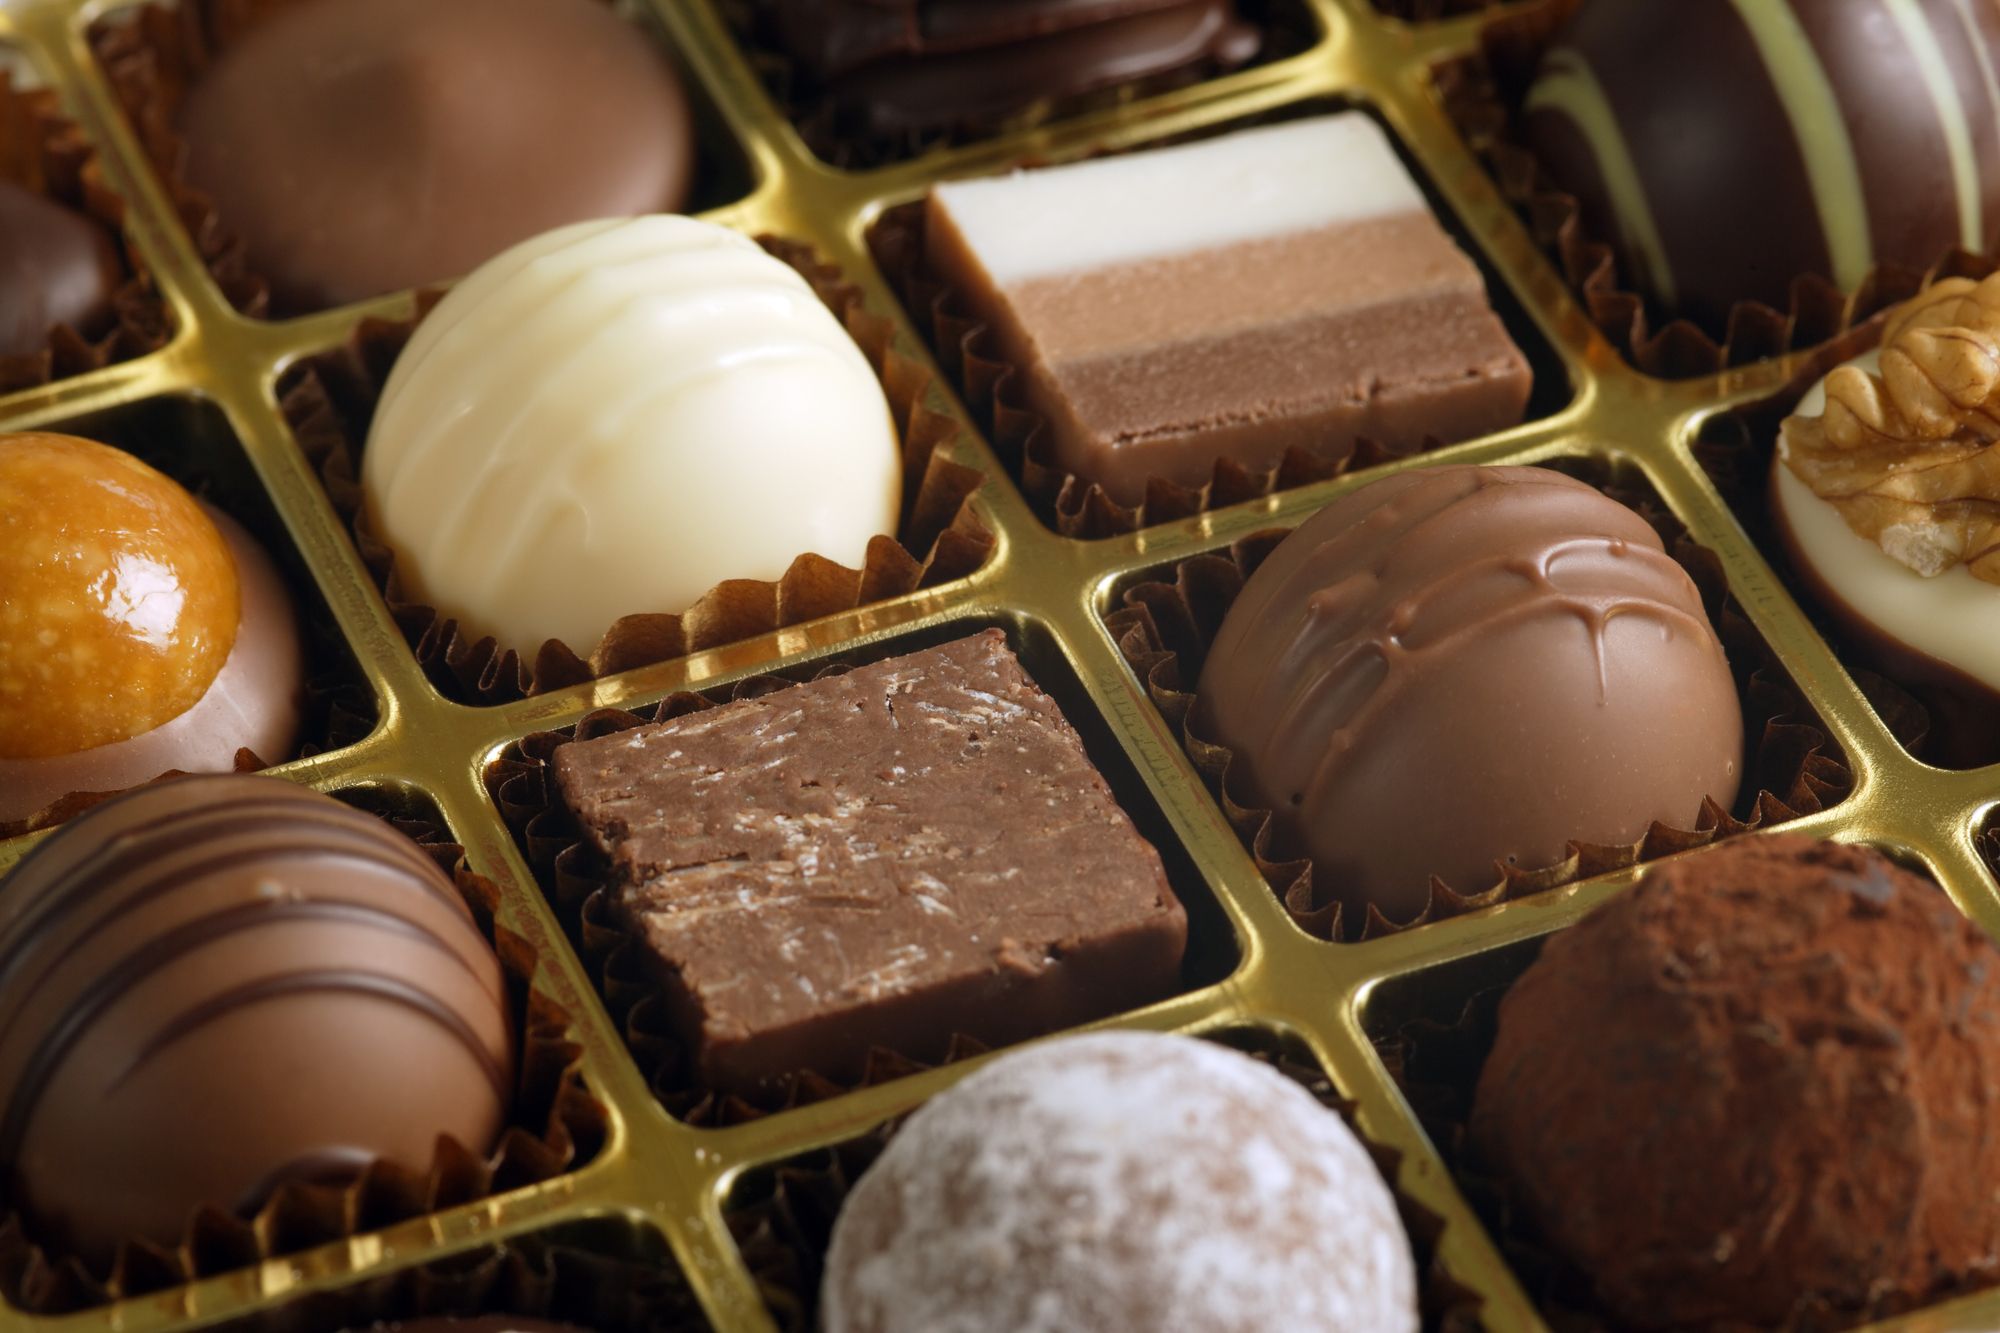 A small assortment of chocolate truffles and pralines in a box. Very Shallow depth of field, focusing across the middle.